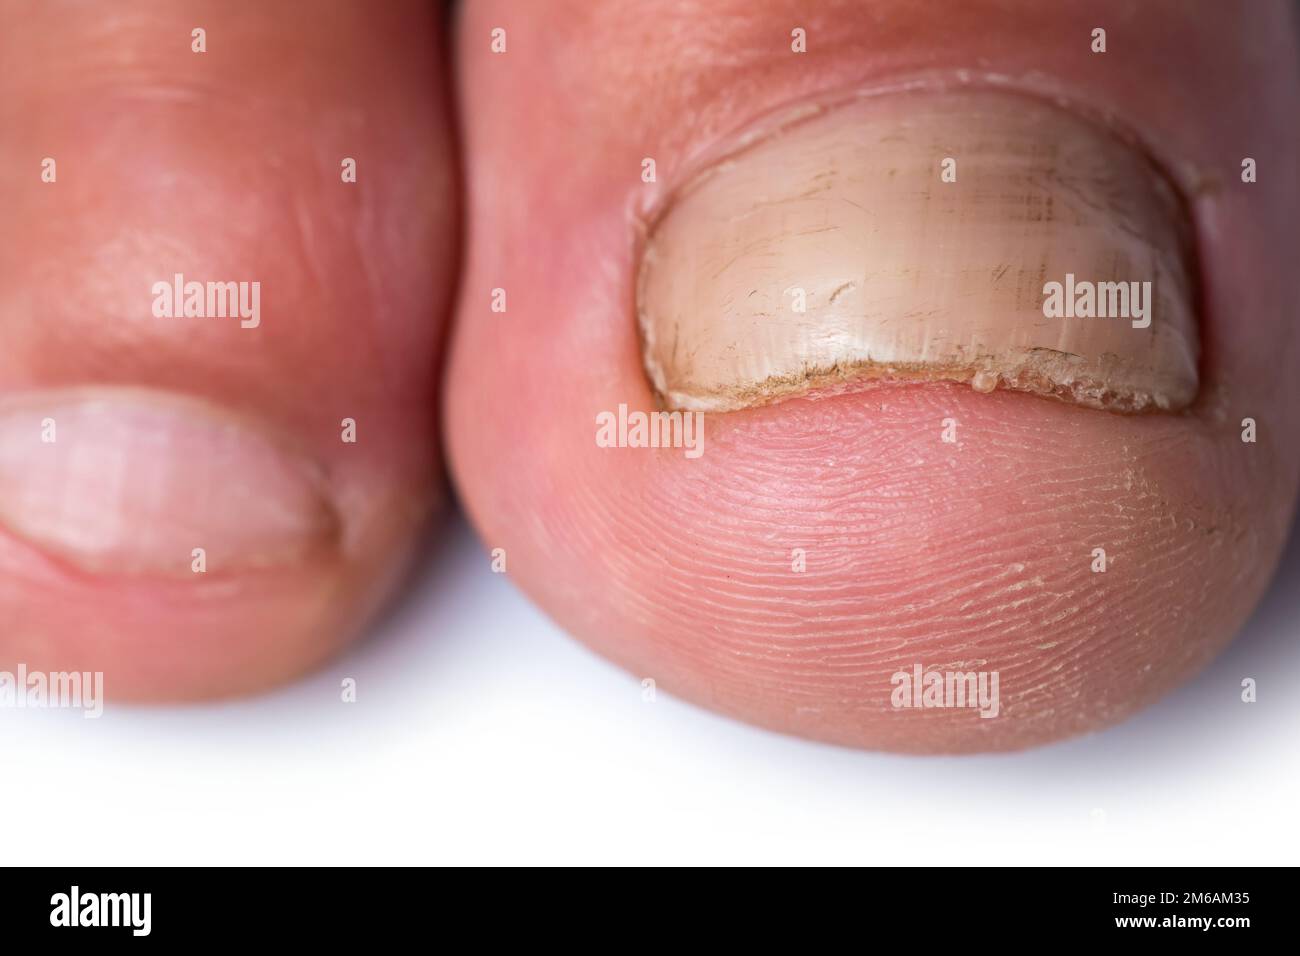 Close up image of a finger with nail fungus infection, Stock Photo